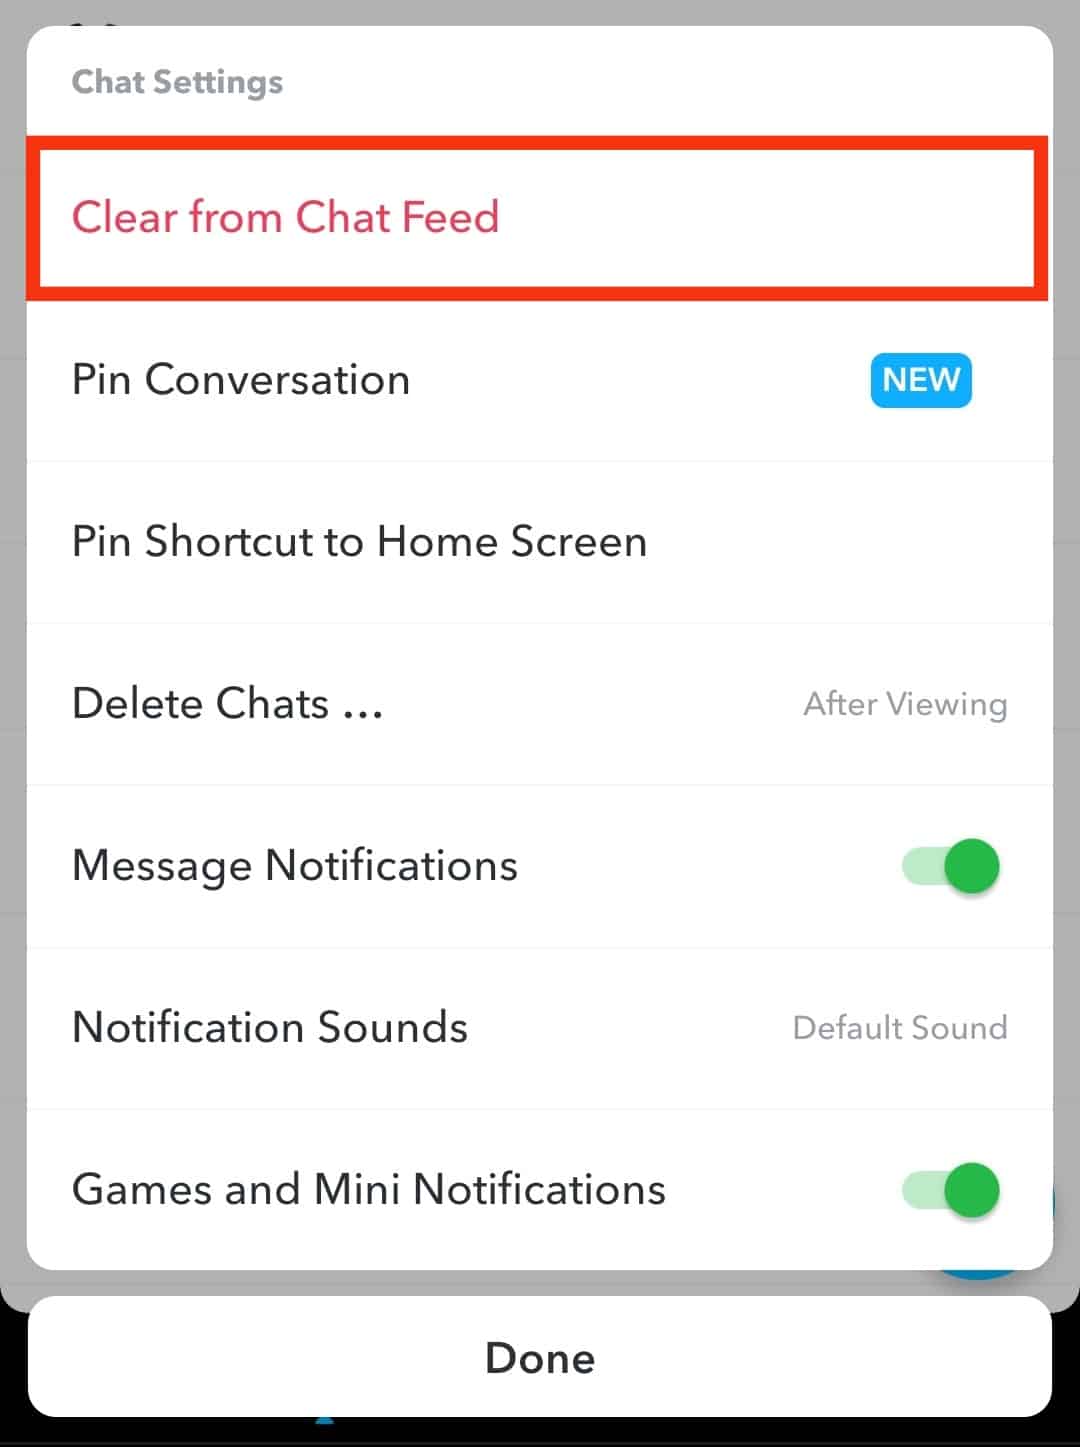 Tap On Clear From Chat Feed